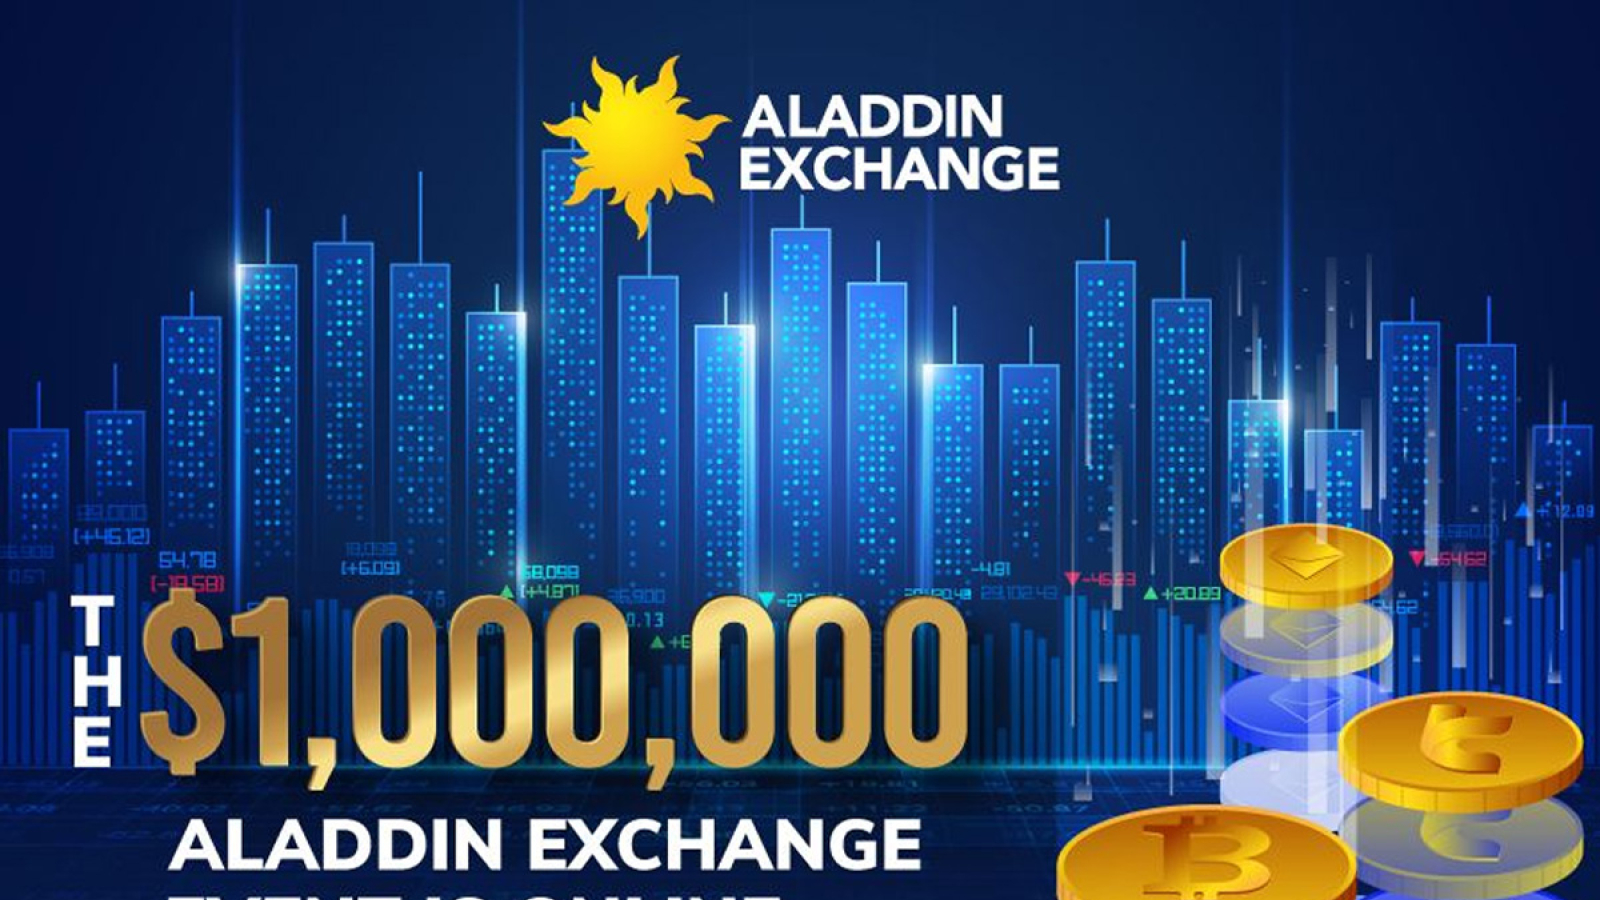 Aladdin Exchange Epic $1,000,000 Event Is Open for the Public